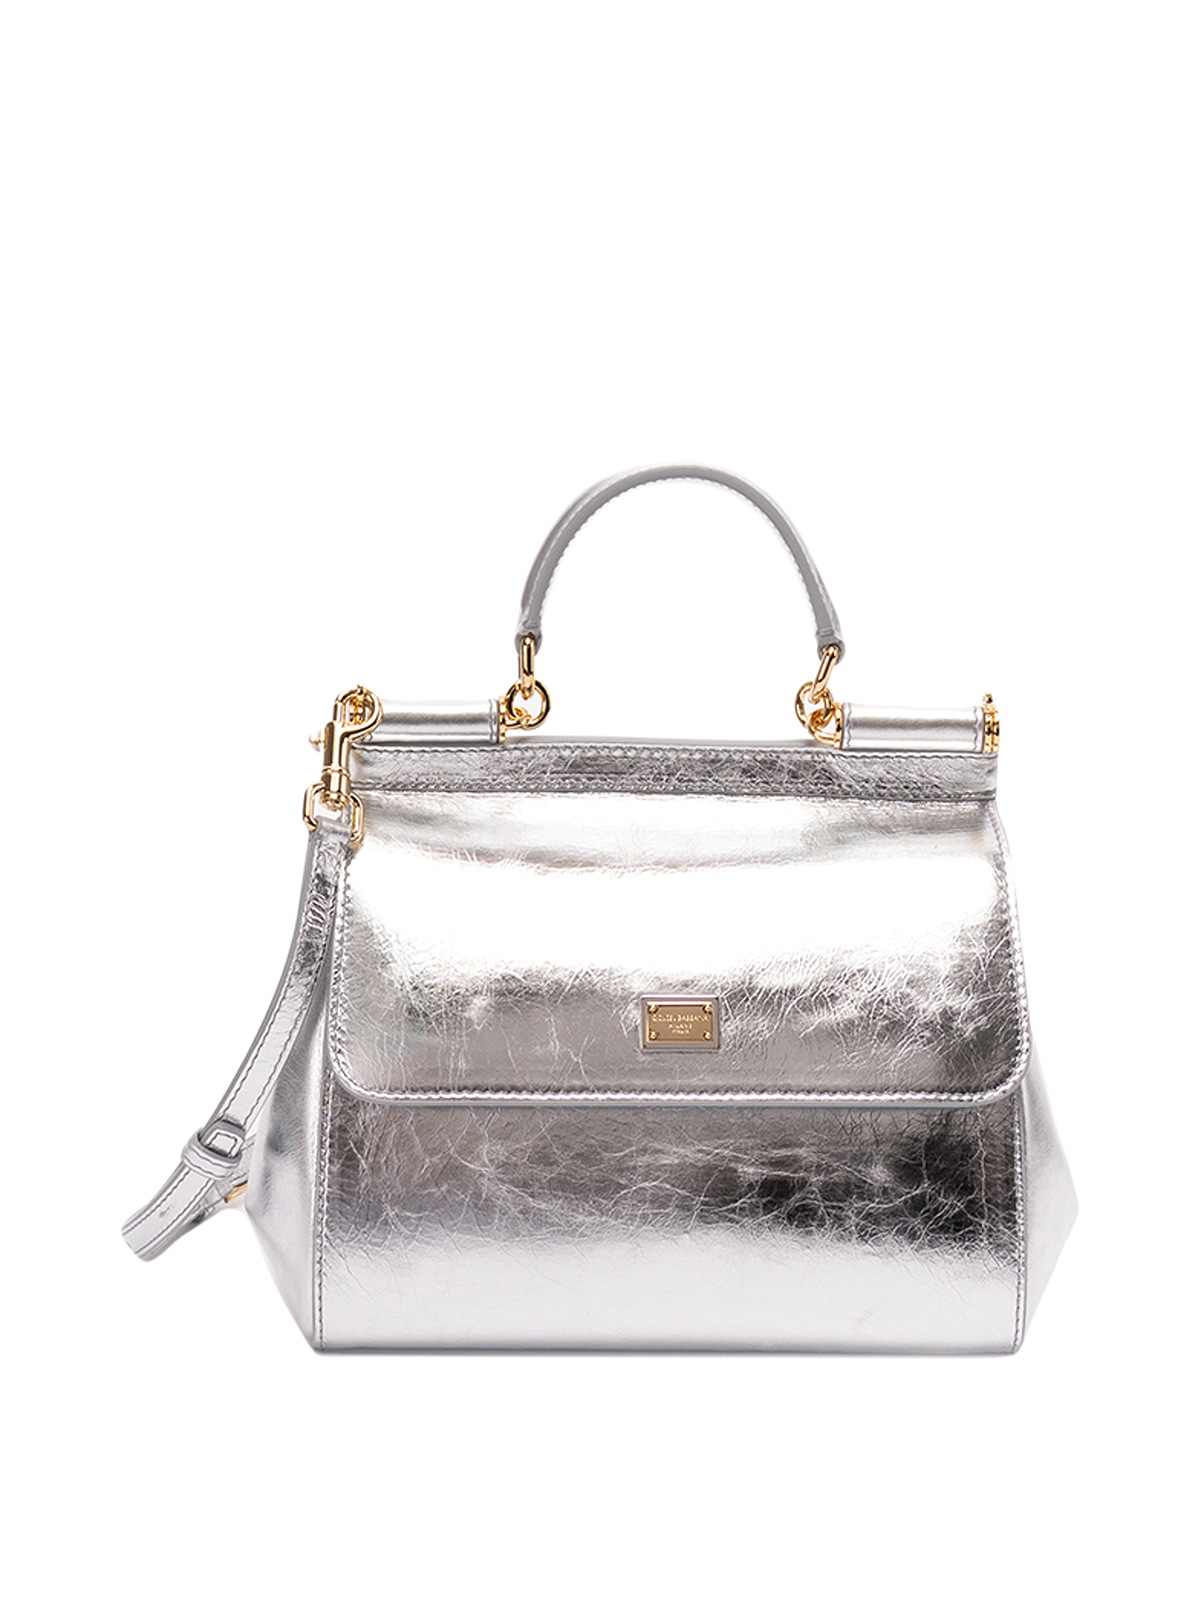 Dolce & Gabbana Women's Small `Sicily` Bag - White - Top Handle Bags